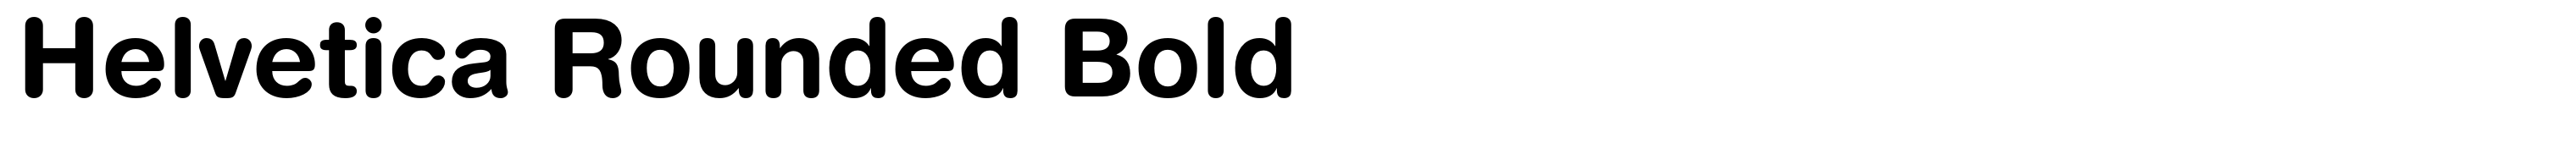 Helvetica Rounded Bold